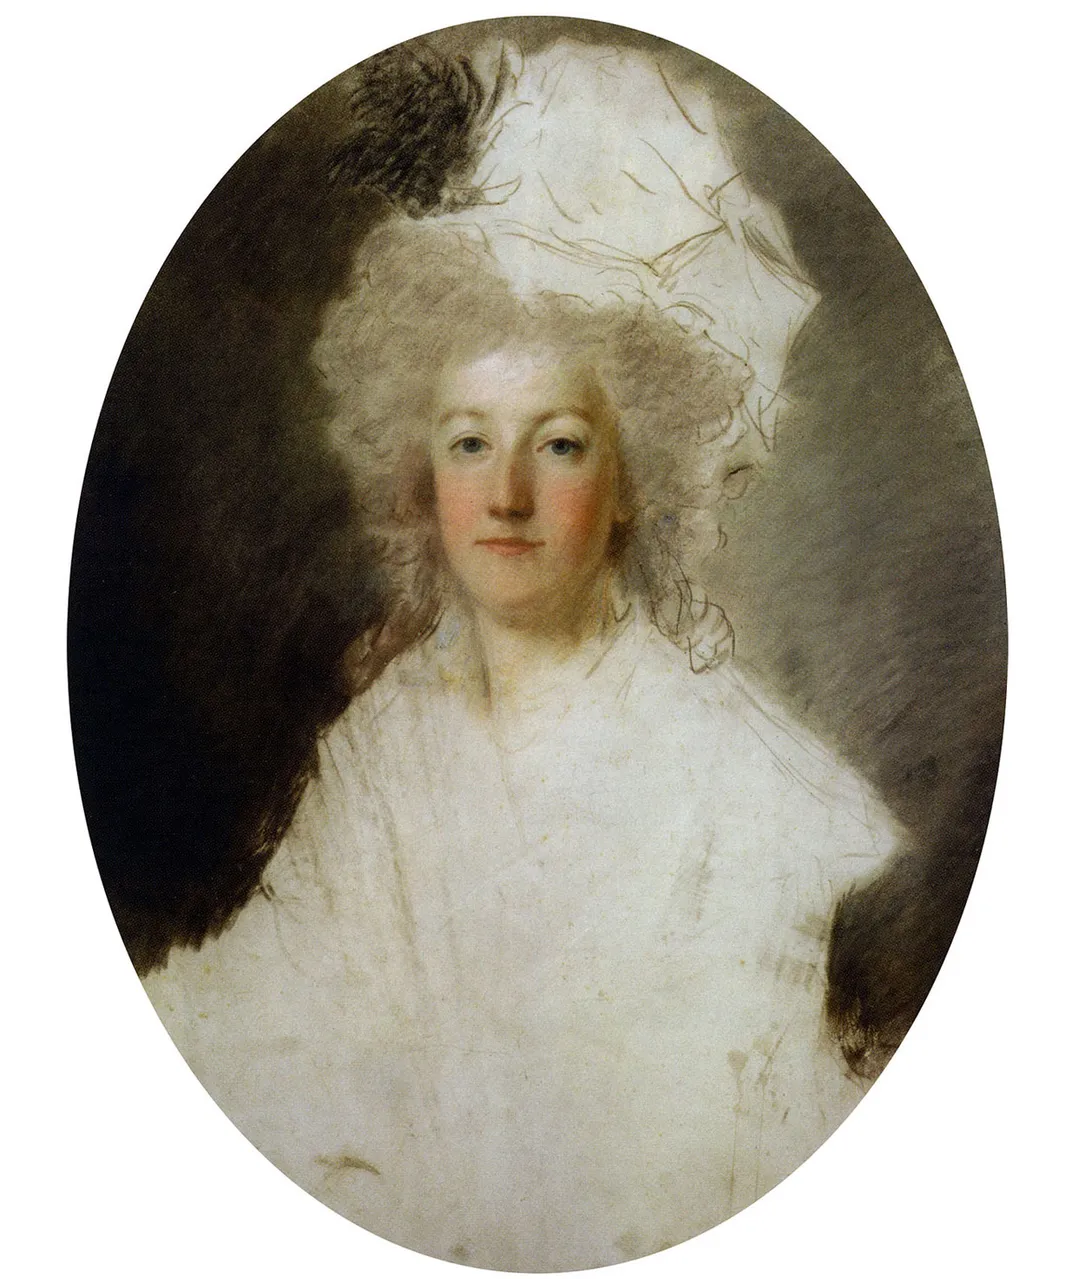 An unfinished portrait of Marie Antoinette by Alexander Kucharsky